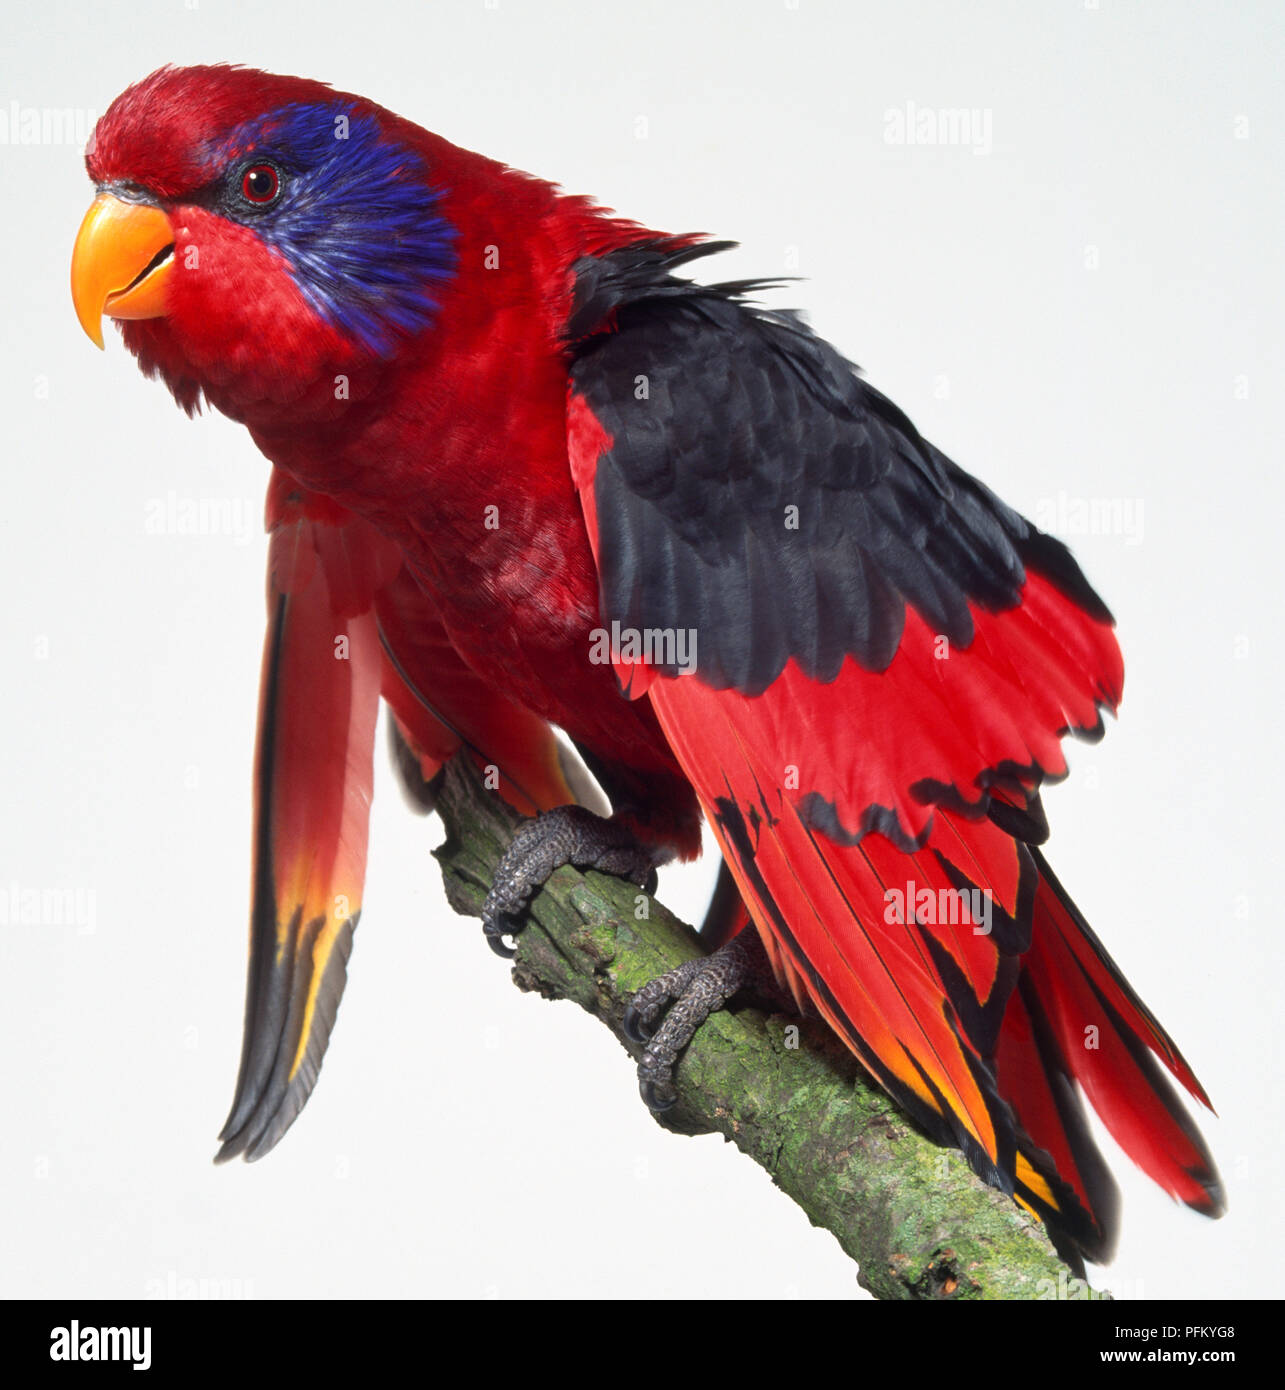 Side view of a Black-Winged Lory, also known as the Blue-Cheeked Lory perching on a lichen-covered branch, with head in profile, showing the orange bill, dark blue band around the eye, red body plumage, and black area on spreading the wings. Stock Photo